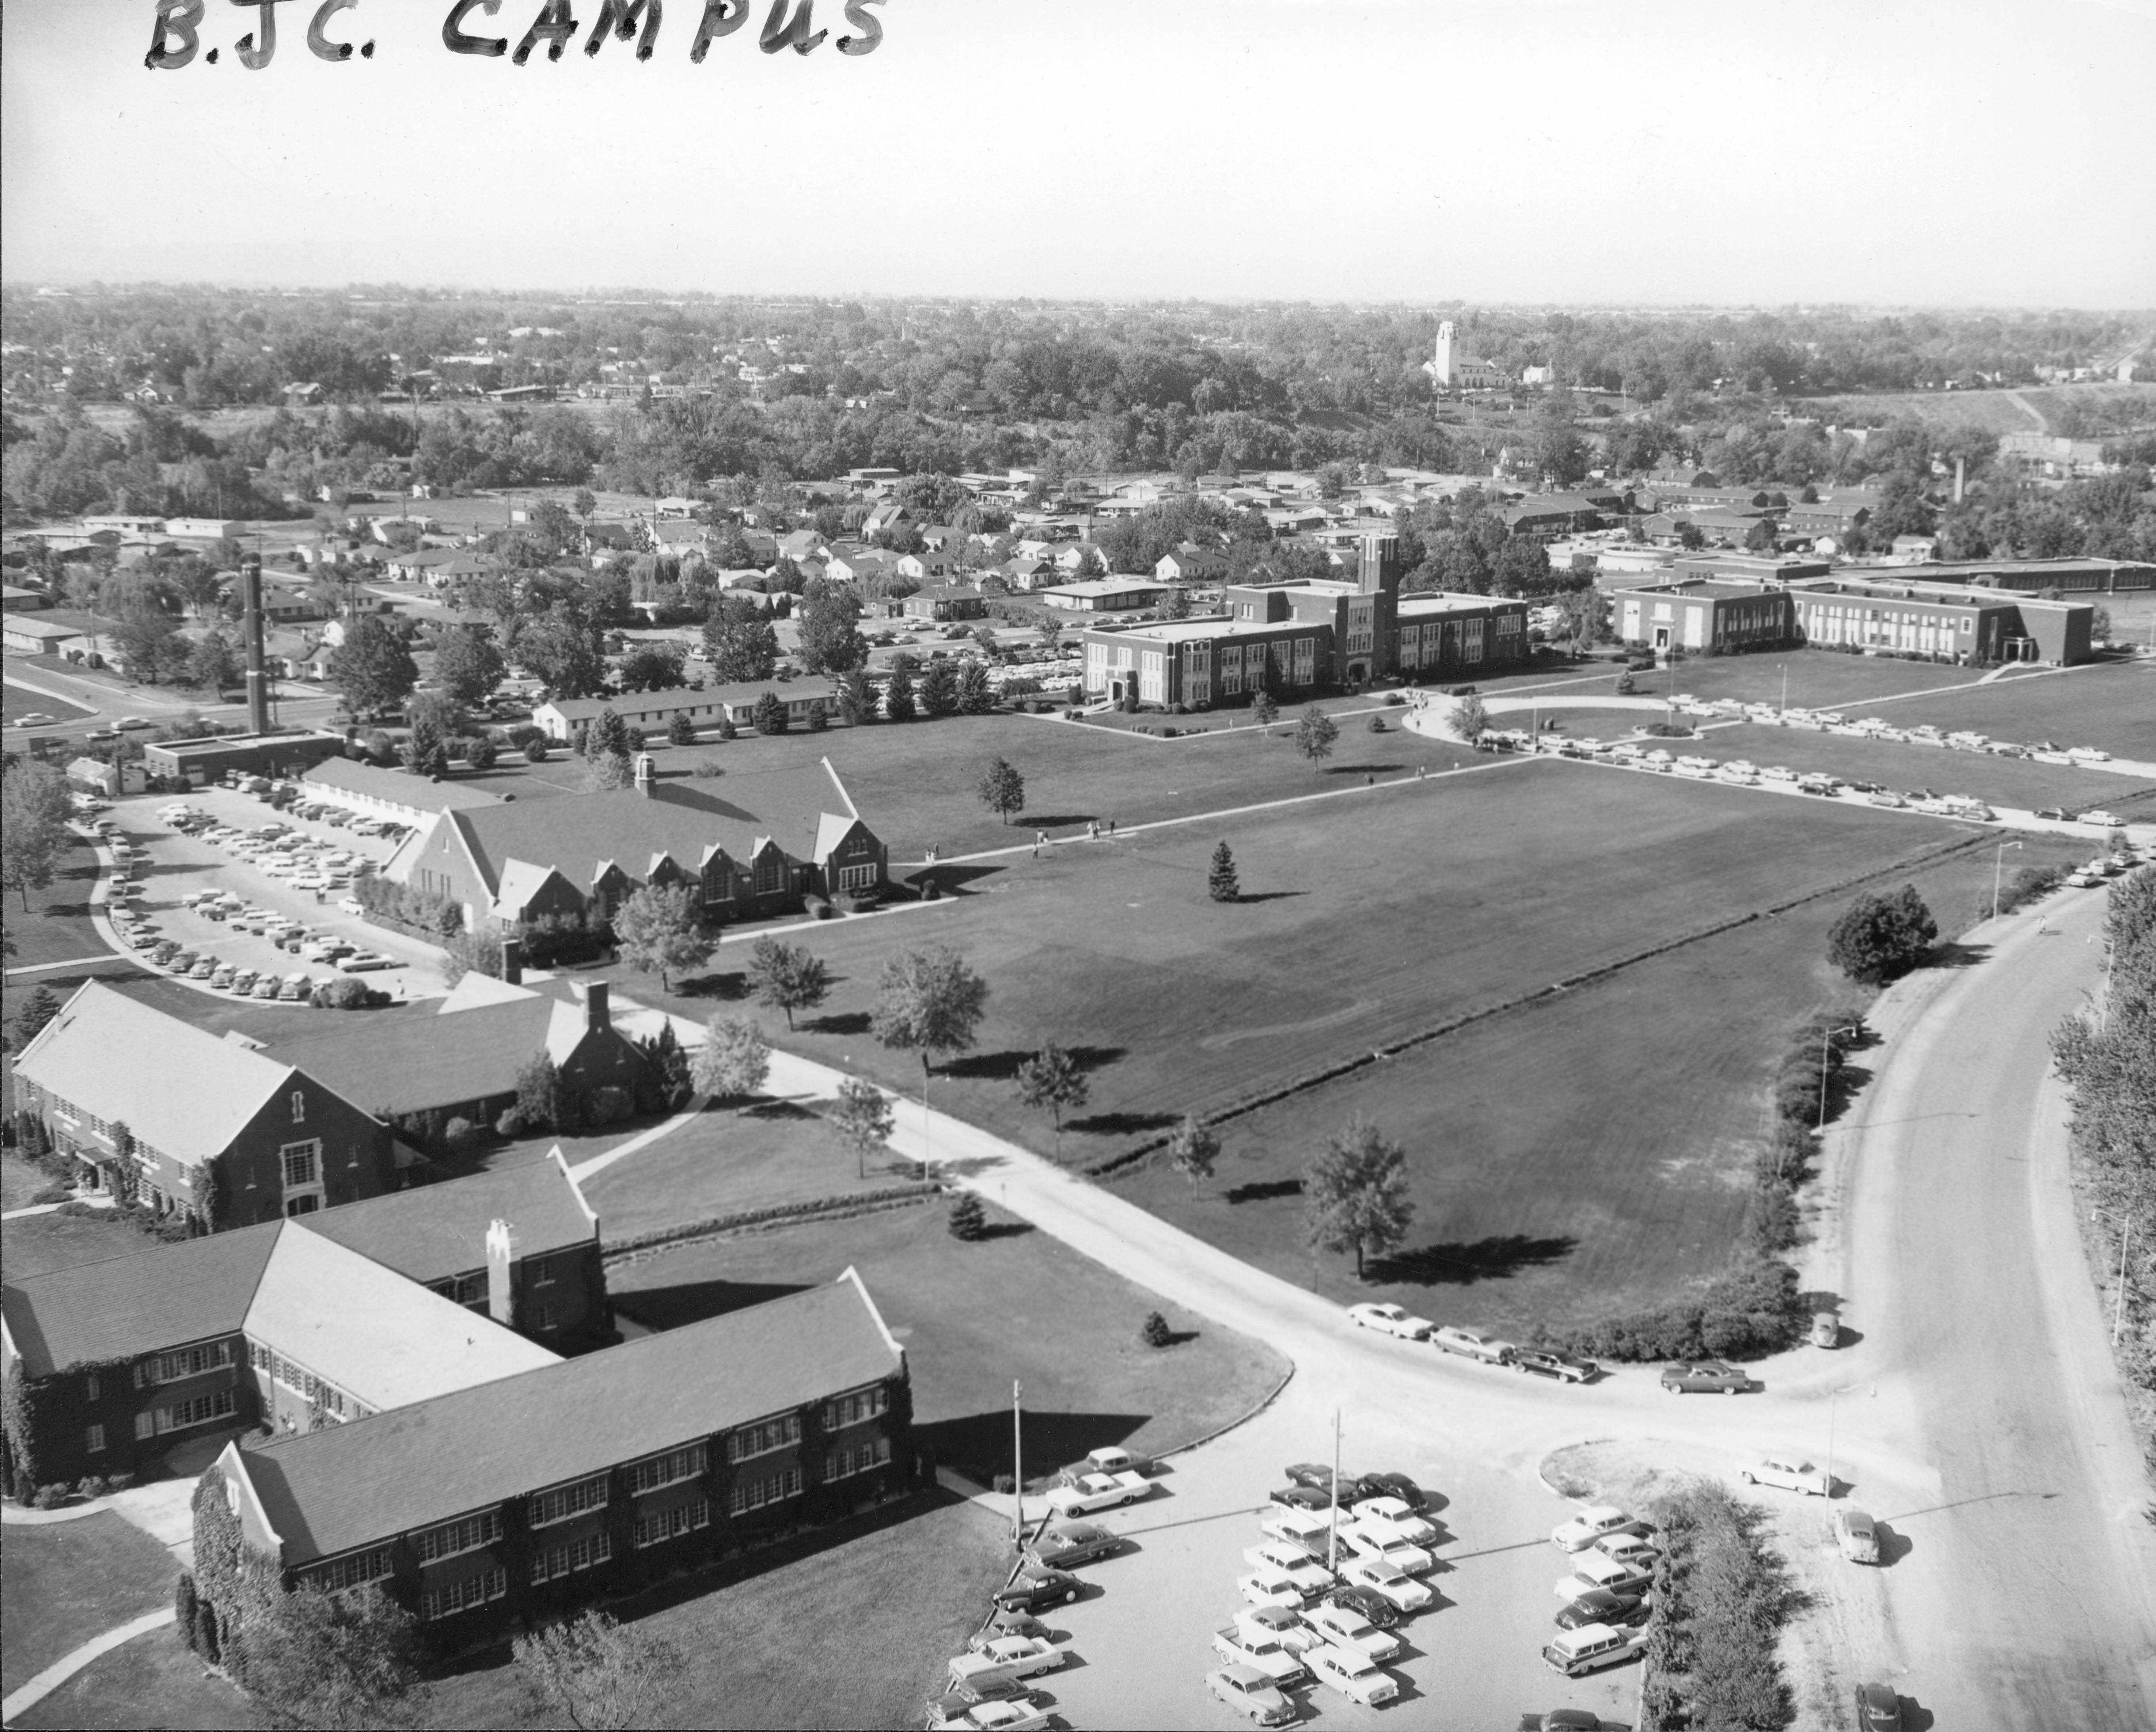 Aerial view, 1950s